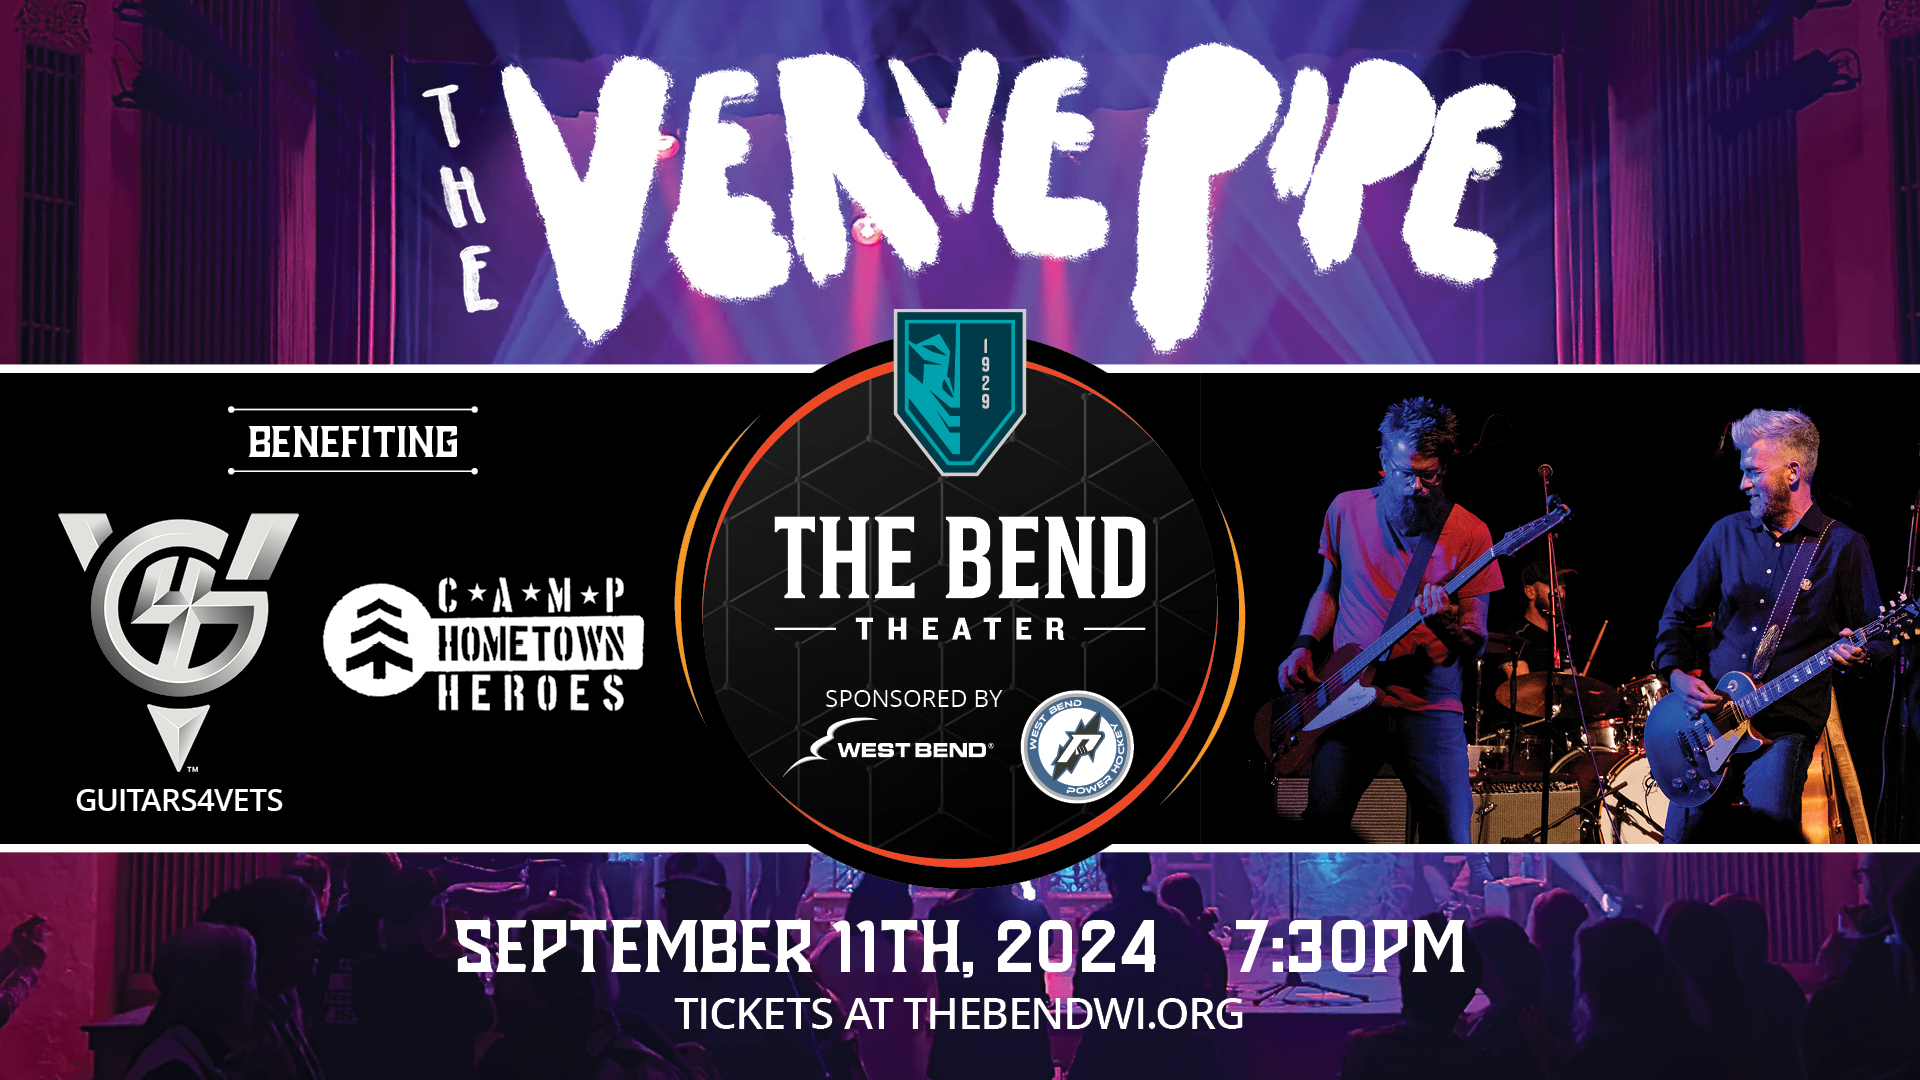 The Verve Pipe benefiting Guitars 4 Vets & Camp Hometown Heroes